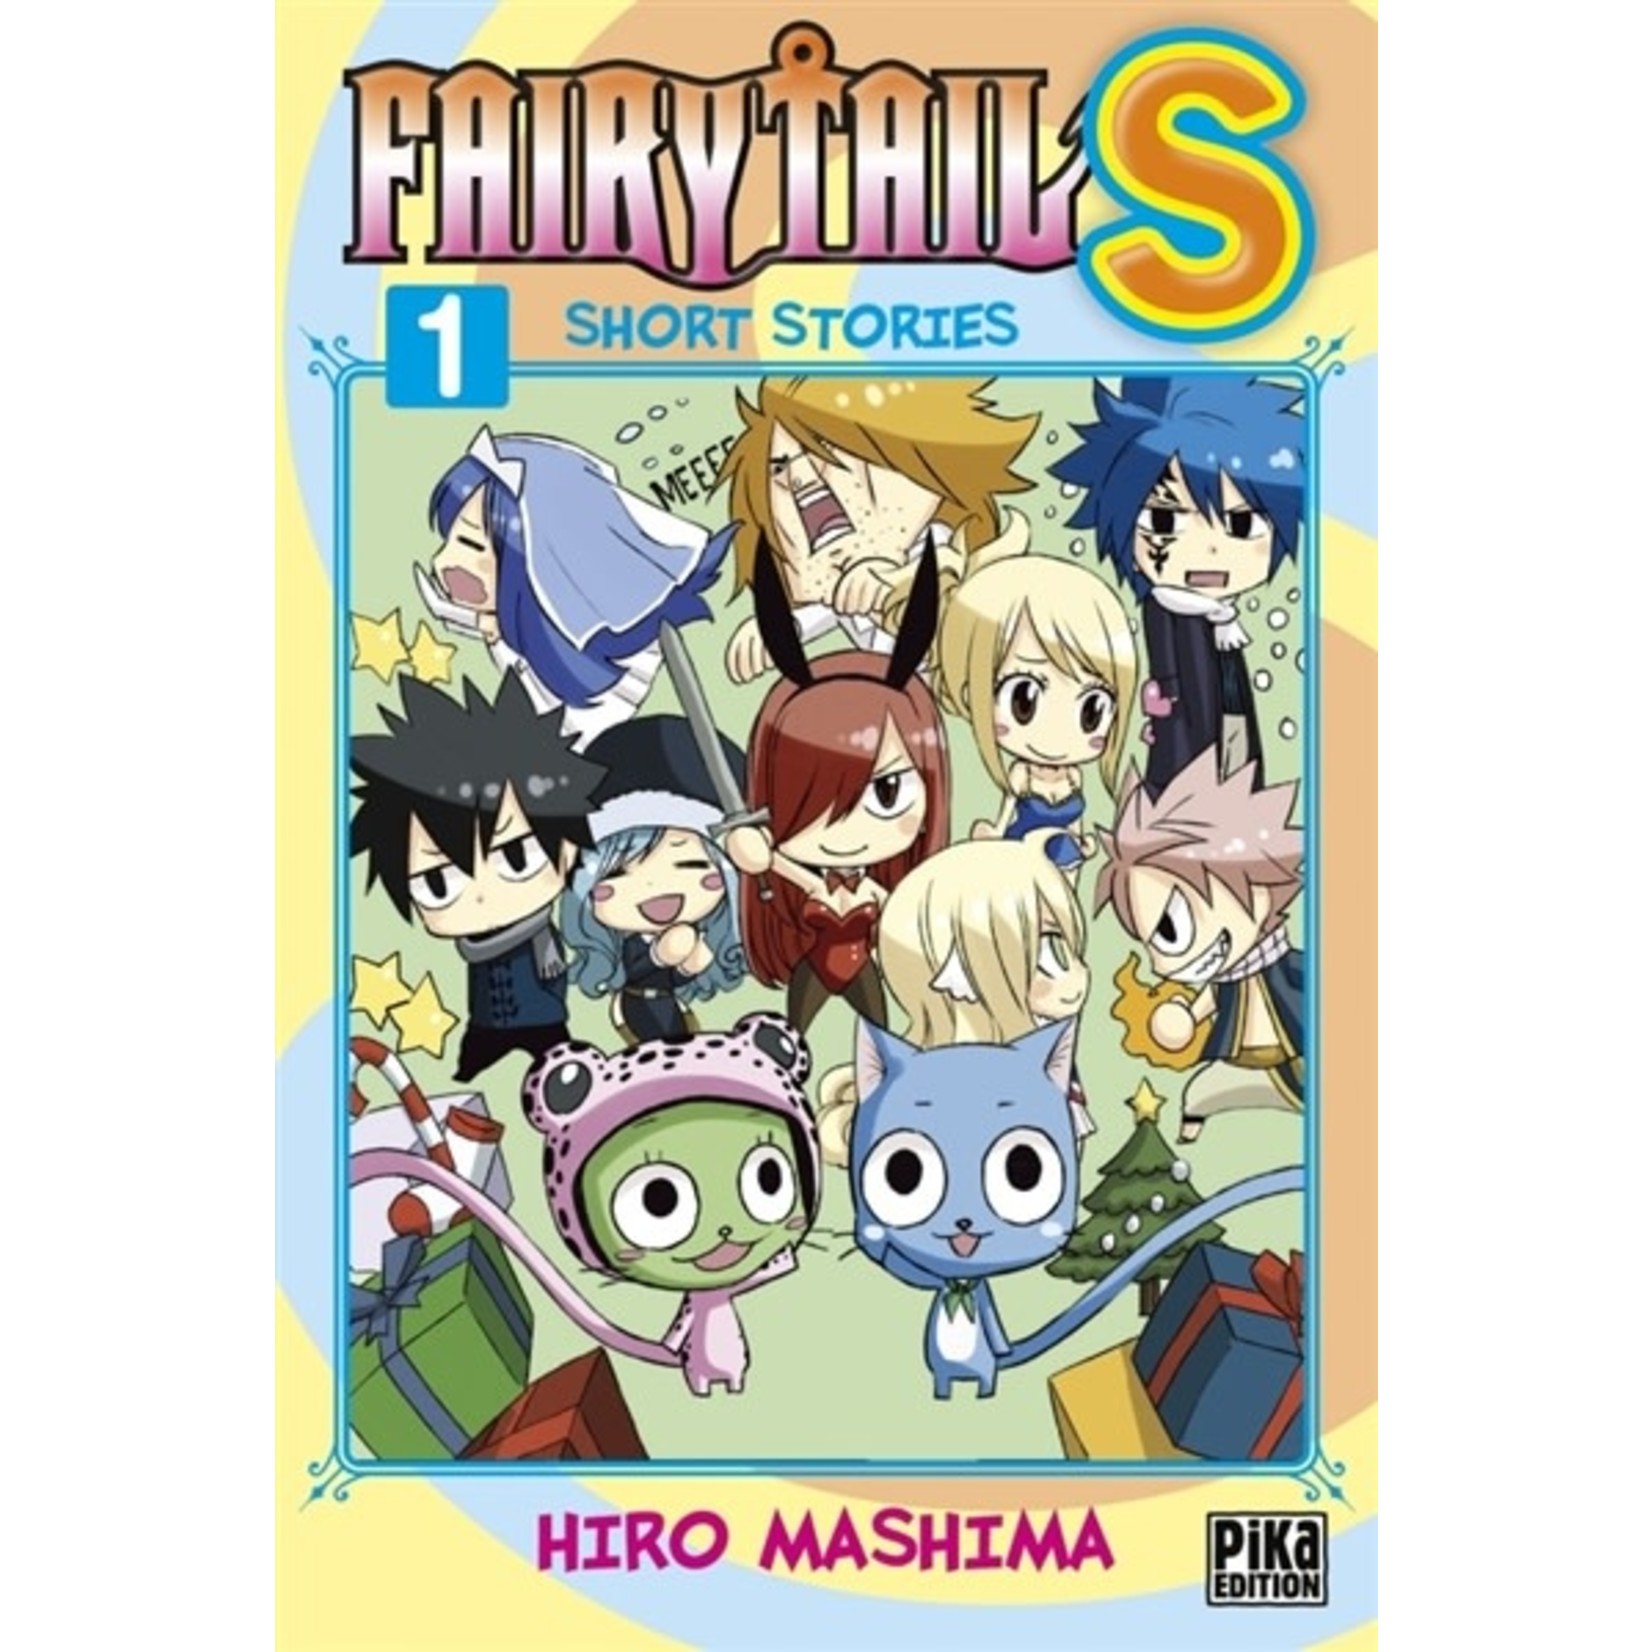 0-Pika Fairy Tail S short stories